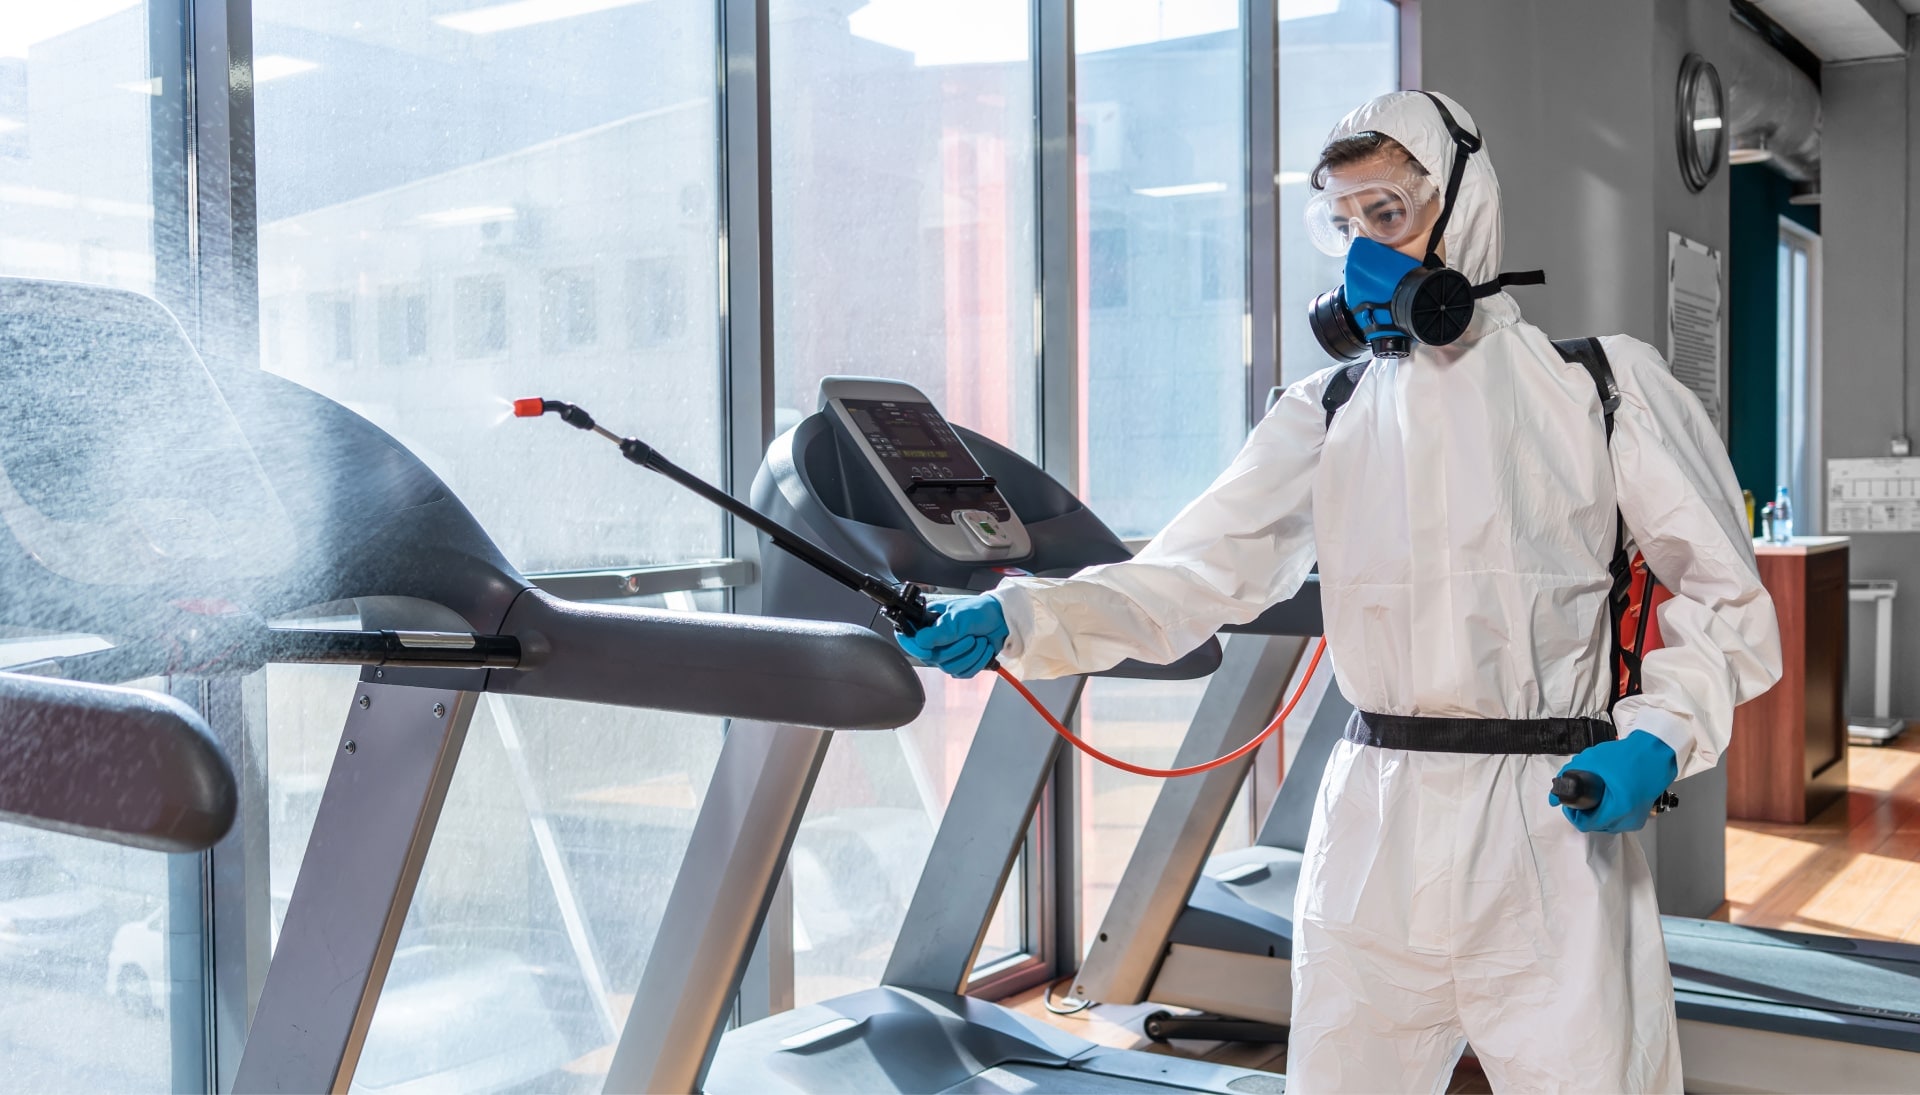 For commercial mold removal, we use the latest technology to identify and eliminate mold damage in Grand Rapids, Michigan.